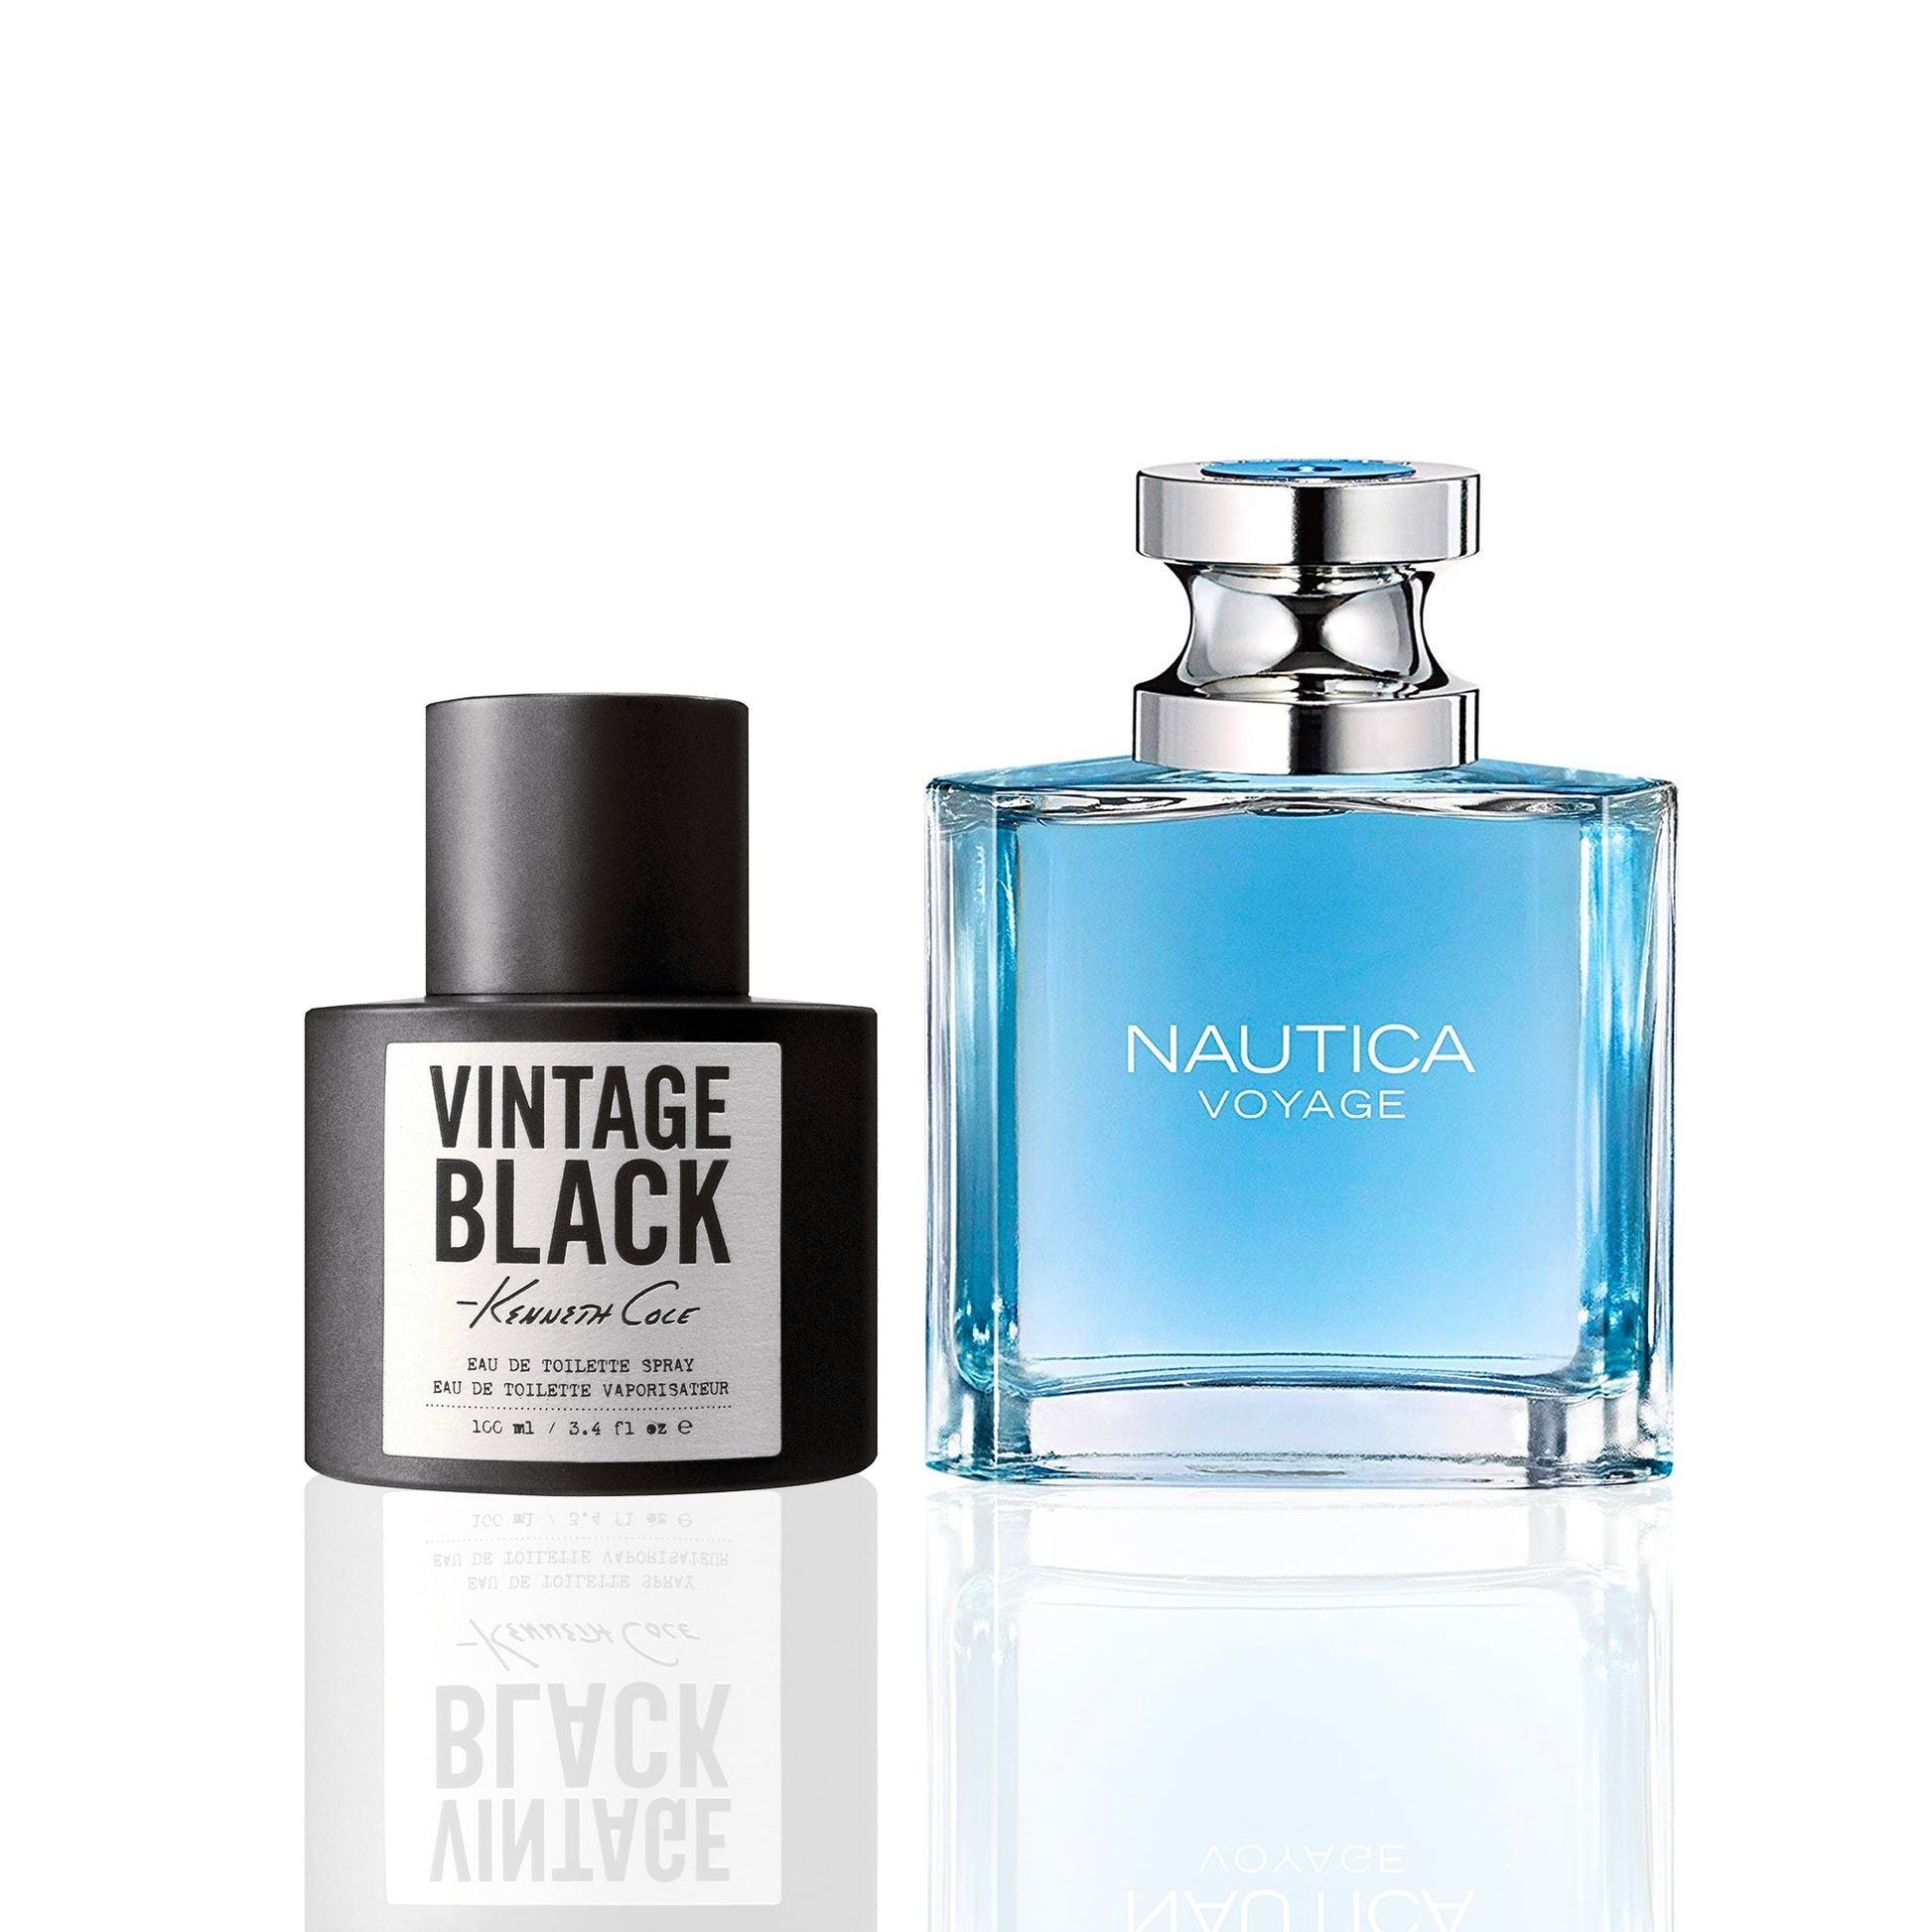 Bundle Deal For Men: Vintage by Kenneth Cole and Voyage by Nautica, Product image 1